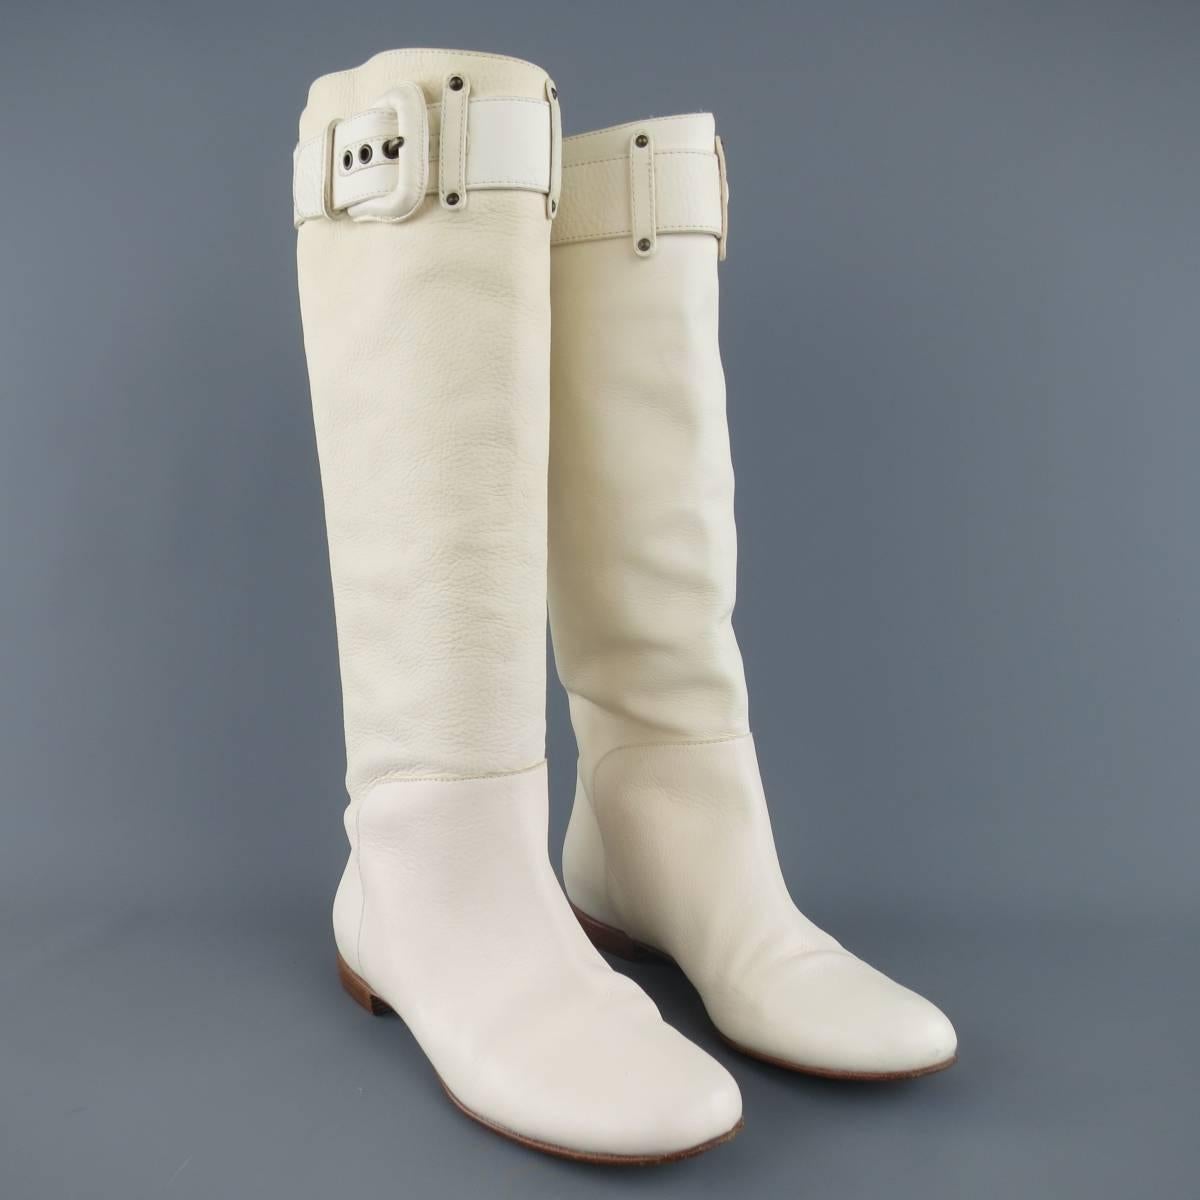 Vintage GIUSEPPE ZANOTTI boots come in cream leather and feature a round toe, tall shaft and leather covered buckle strap detail. Variations in tone and texture throughout leather. Made in Italy.
 
Good Pre-Owned Condition.
Marked: IT 37
